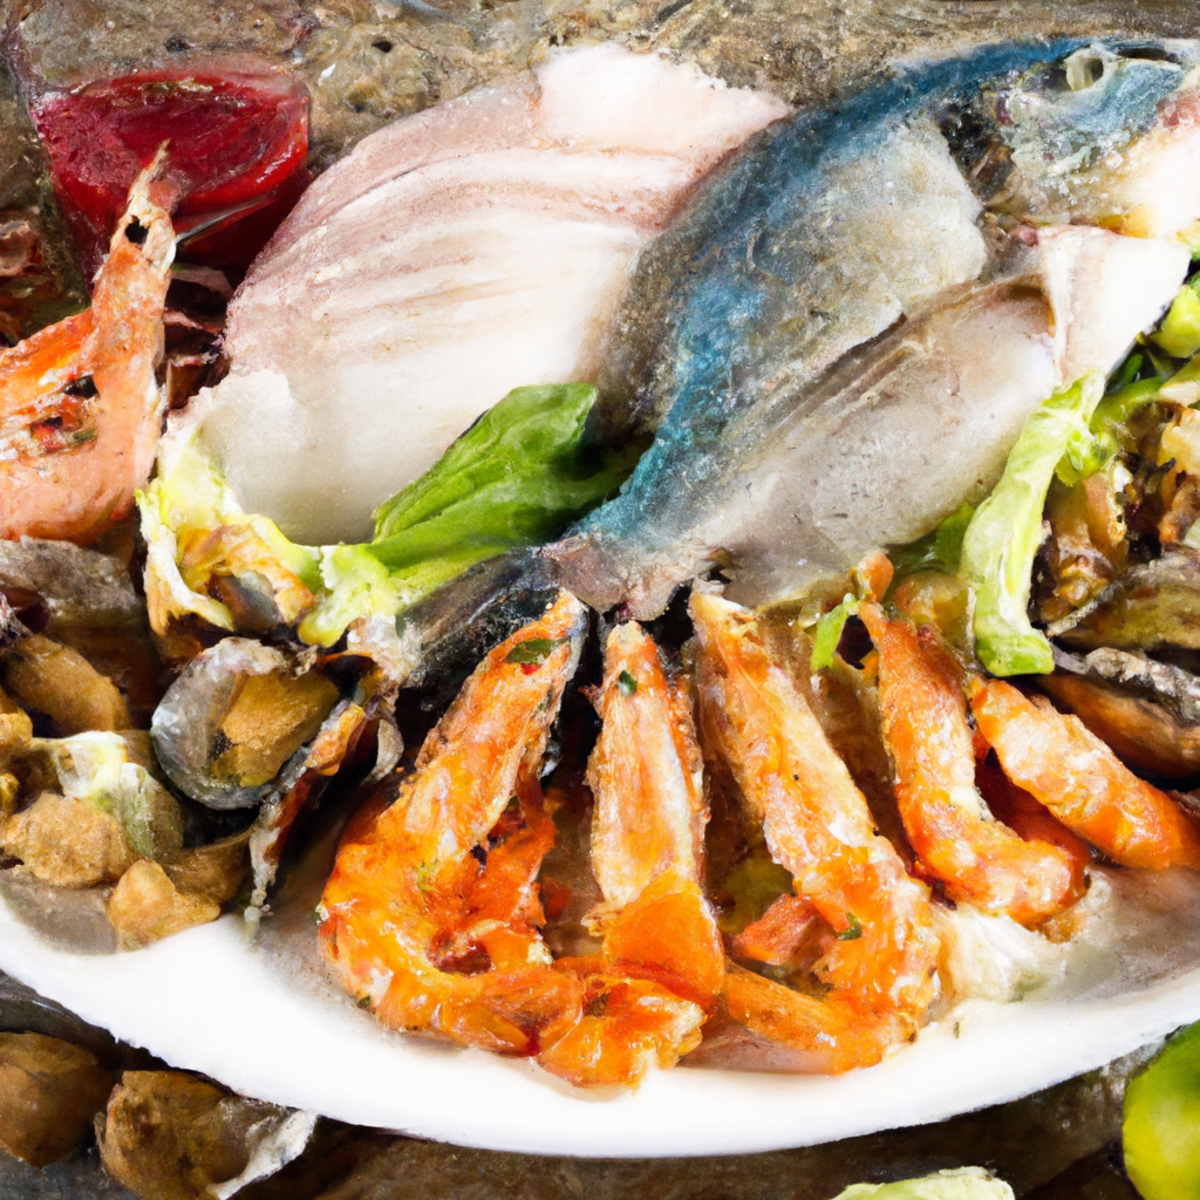 Seafood ingredients arranged artistically on a white plate, capturing the essence of Fish Odor Syndrome.